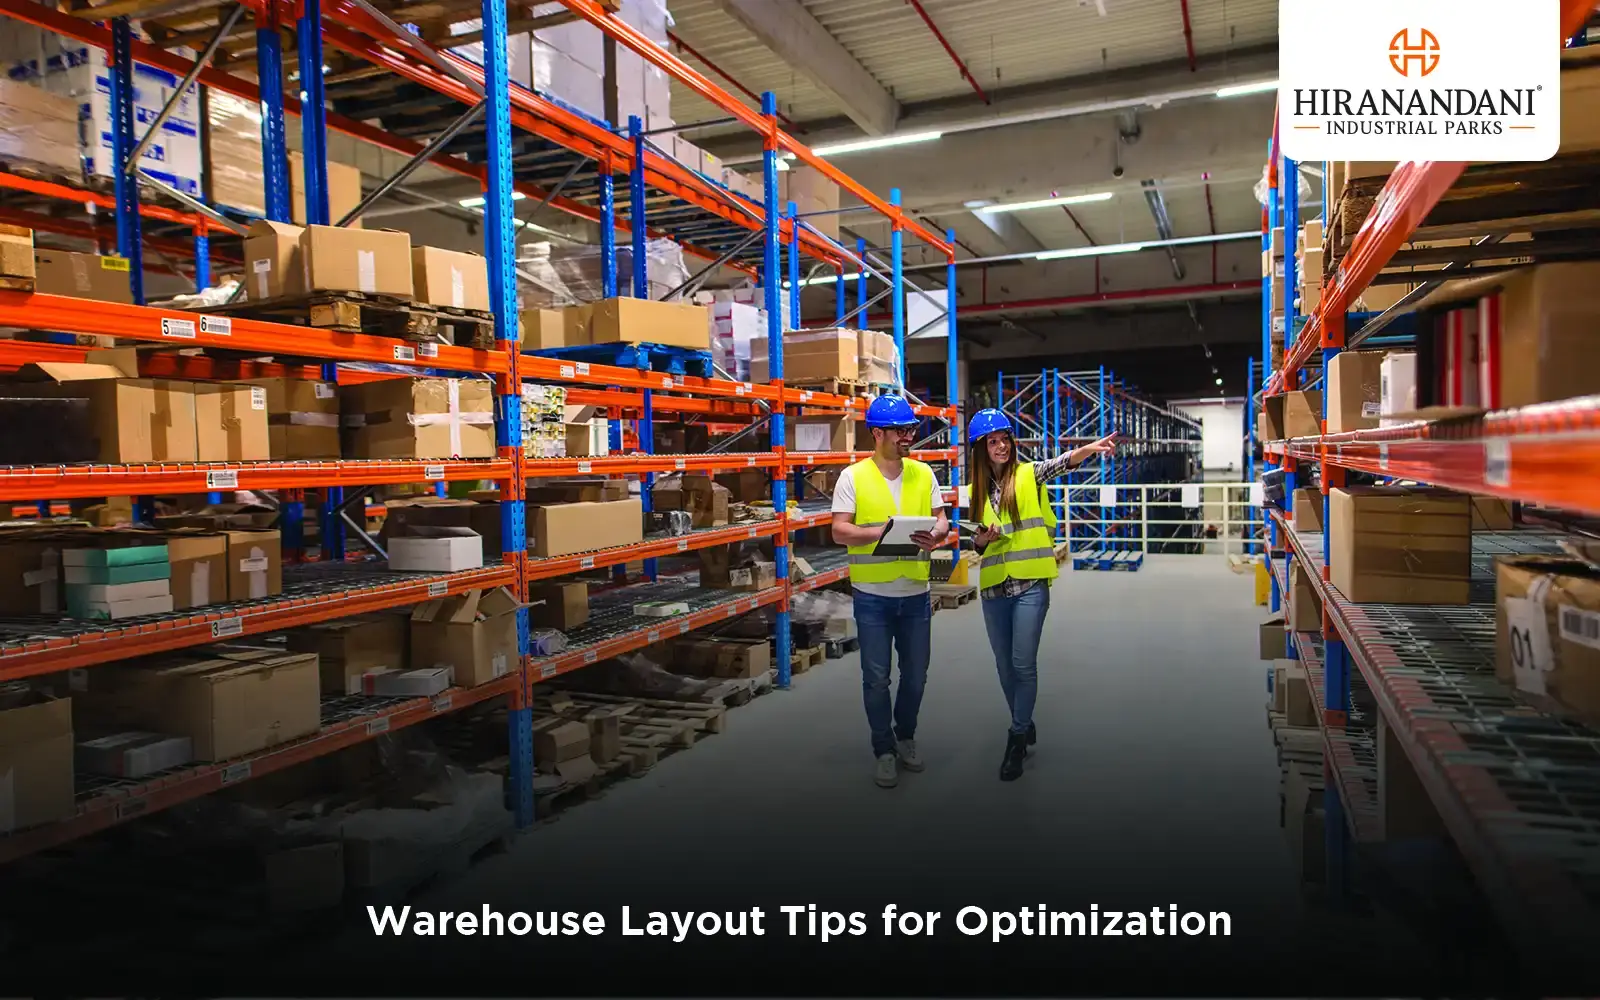 Optimize Your Warehouse with Essential Layout Tips